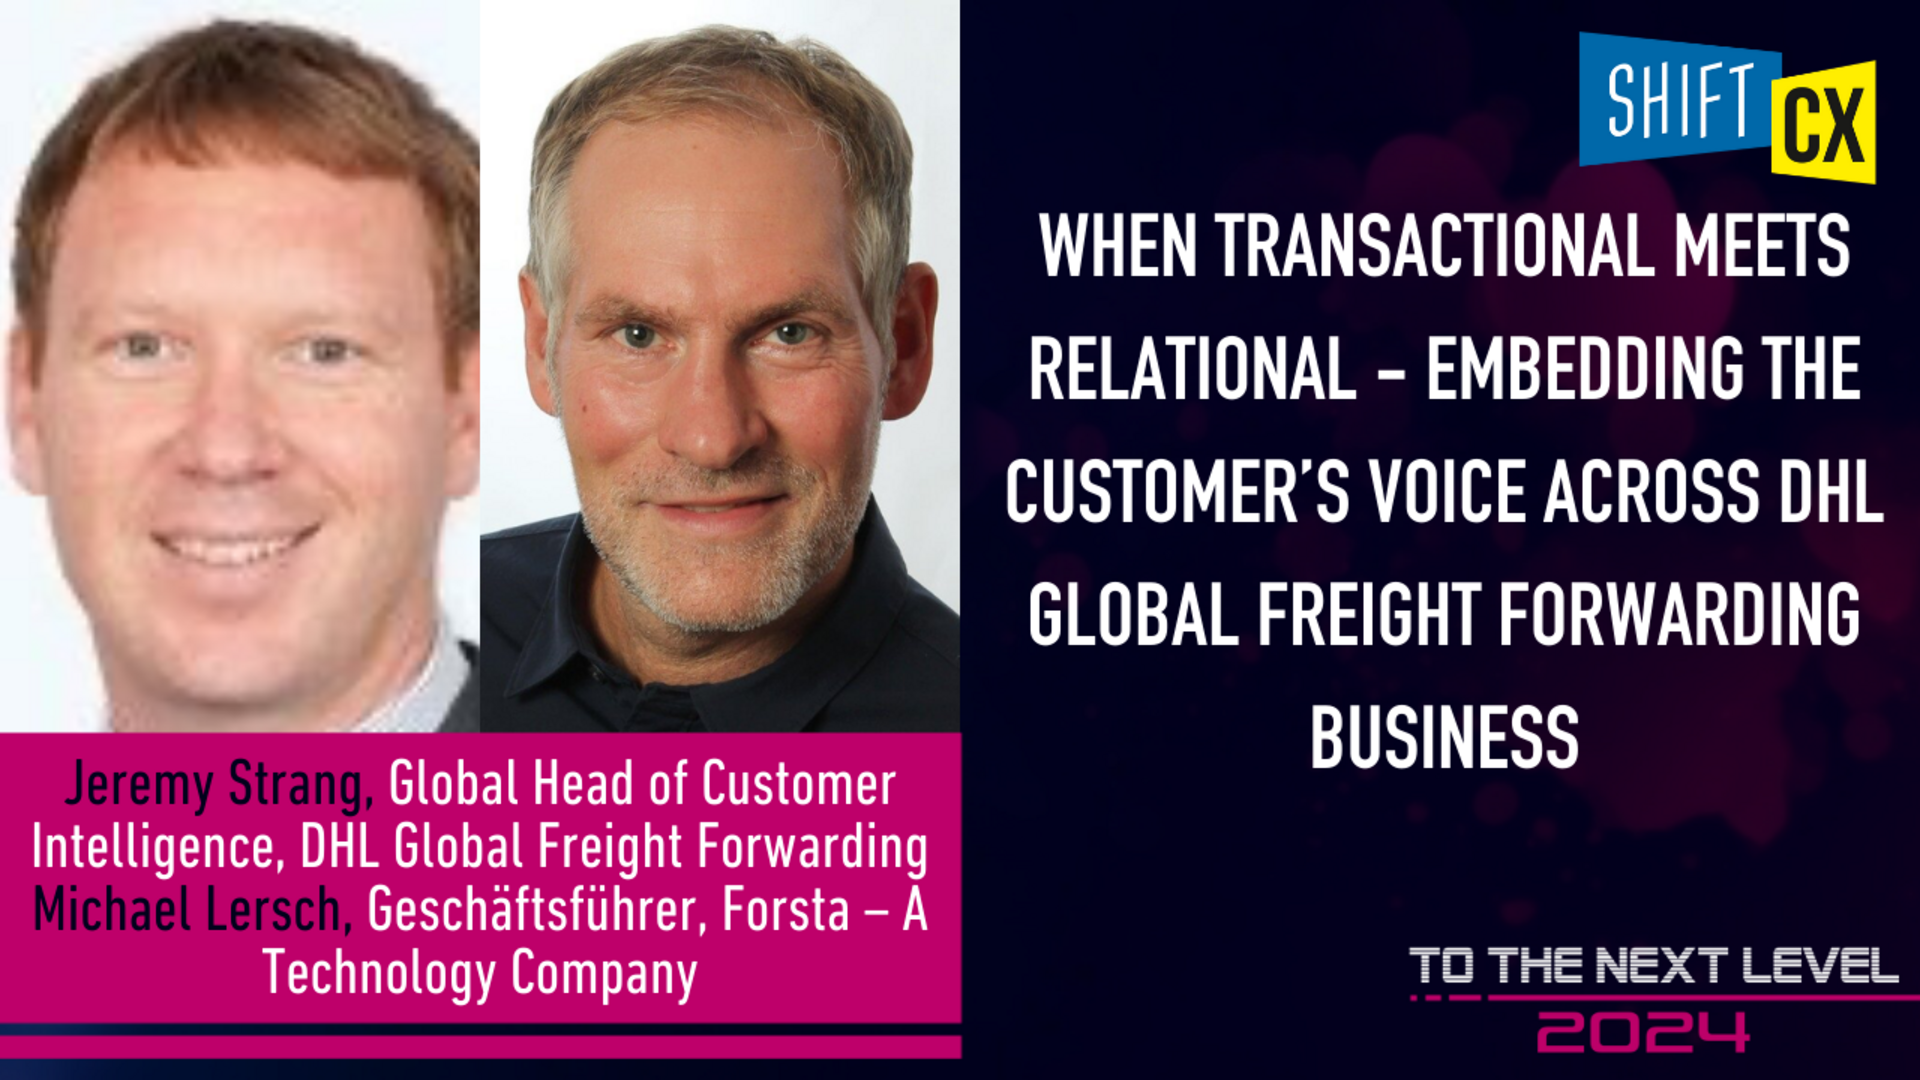 When Transactional Meets Relational - Embedding The Customer’s Voice Across DHL Global Freight Forwarding Business